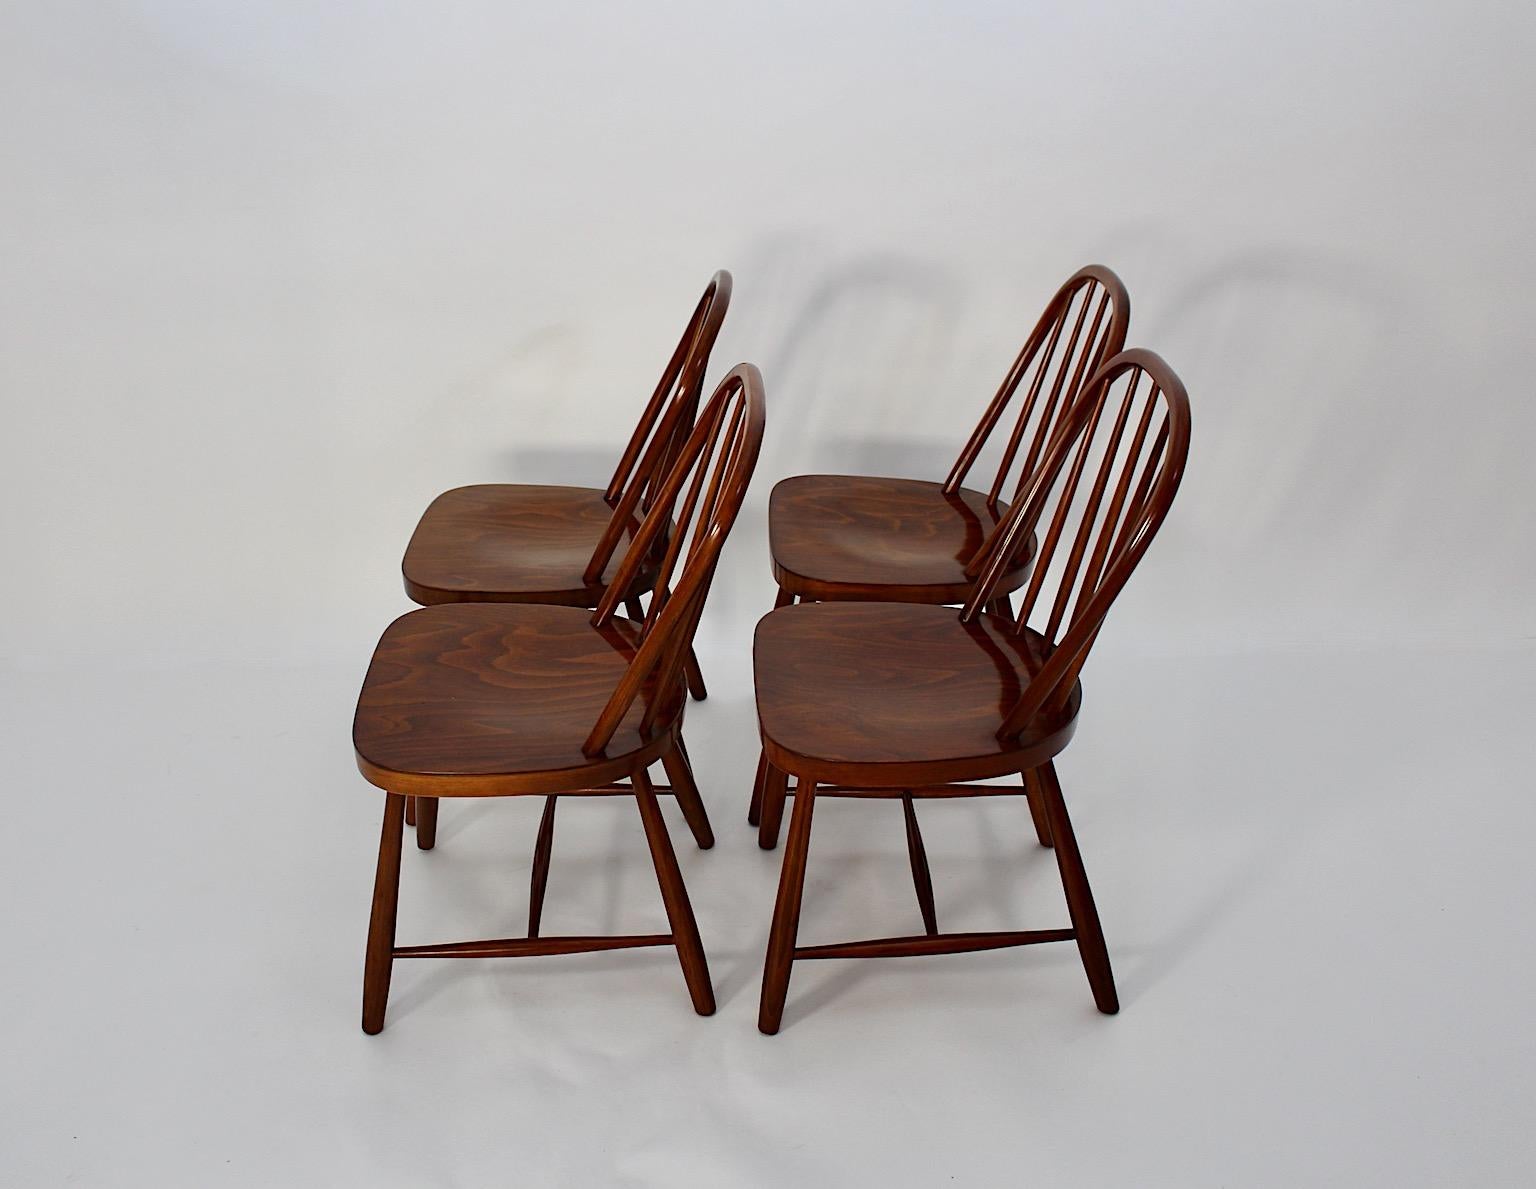 Art Deco Vintage Beech Windsor Dining Room Chairs Four Josef Frank 1920s Vienna For Sale 1